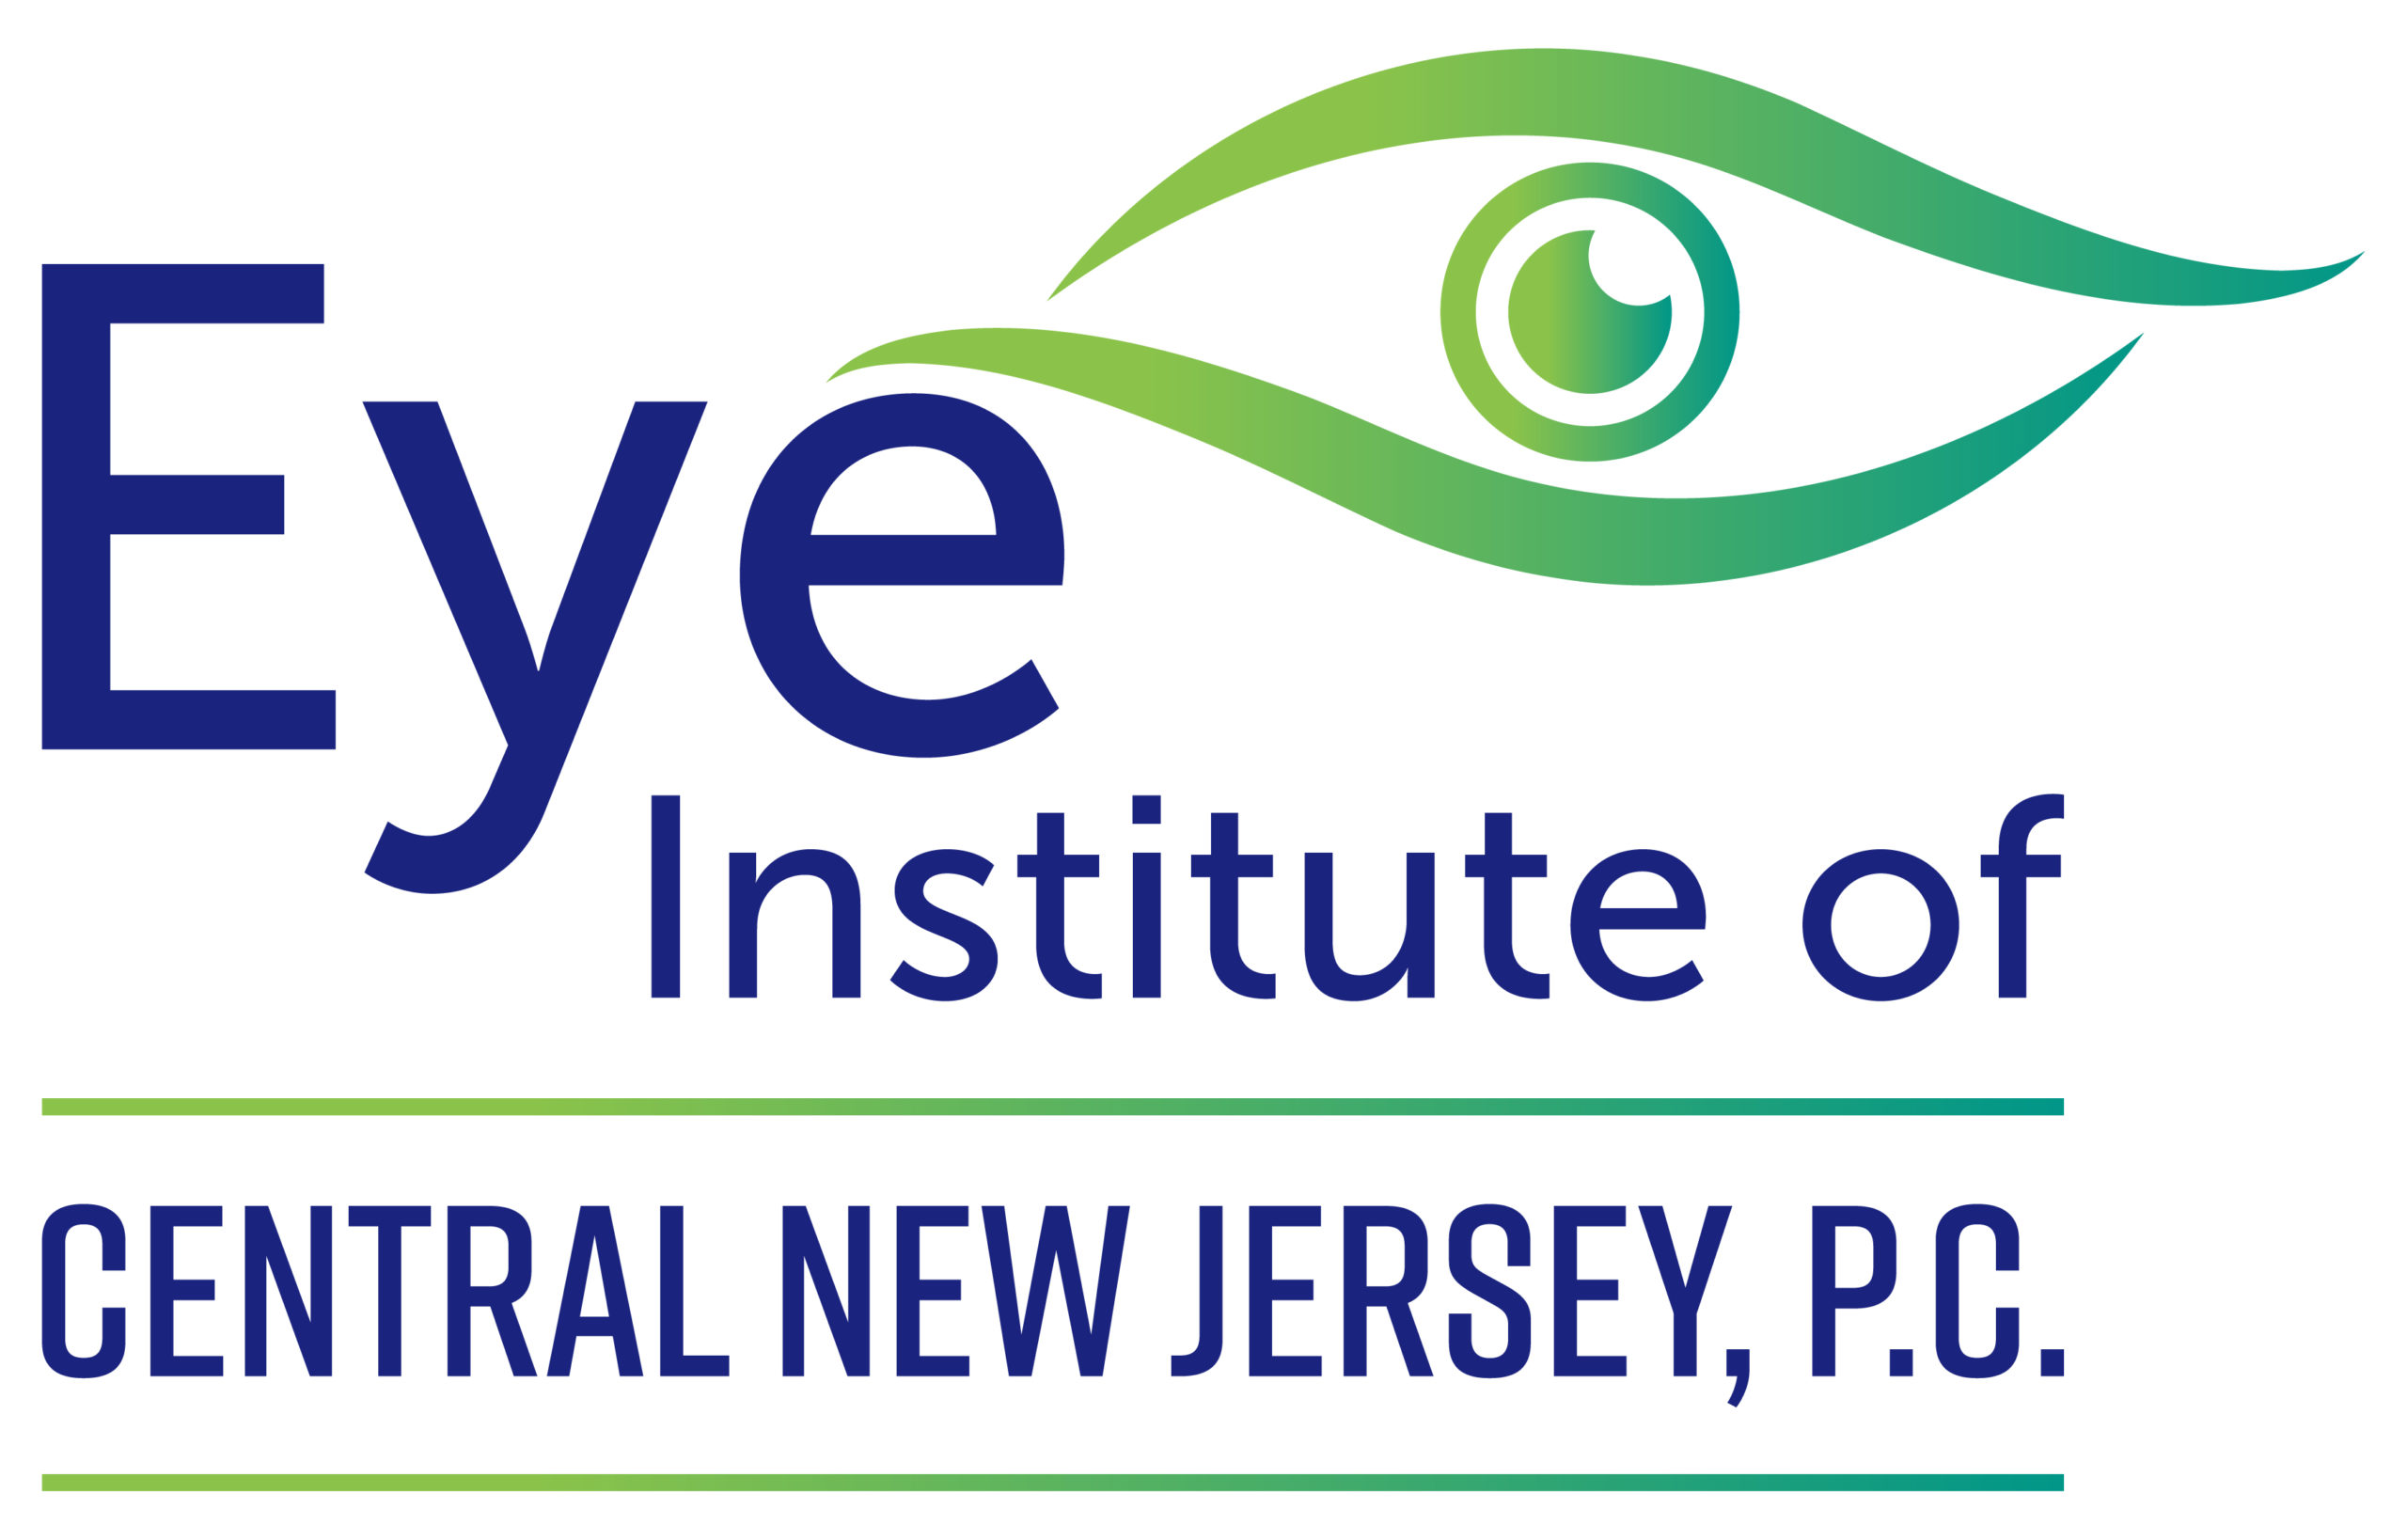 The Eye Institute of Central New Jersey in Cranford